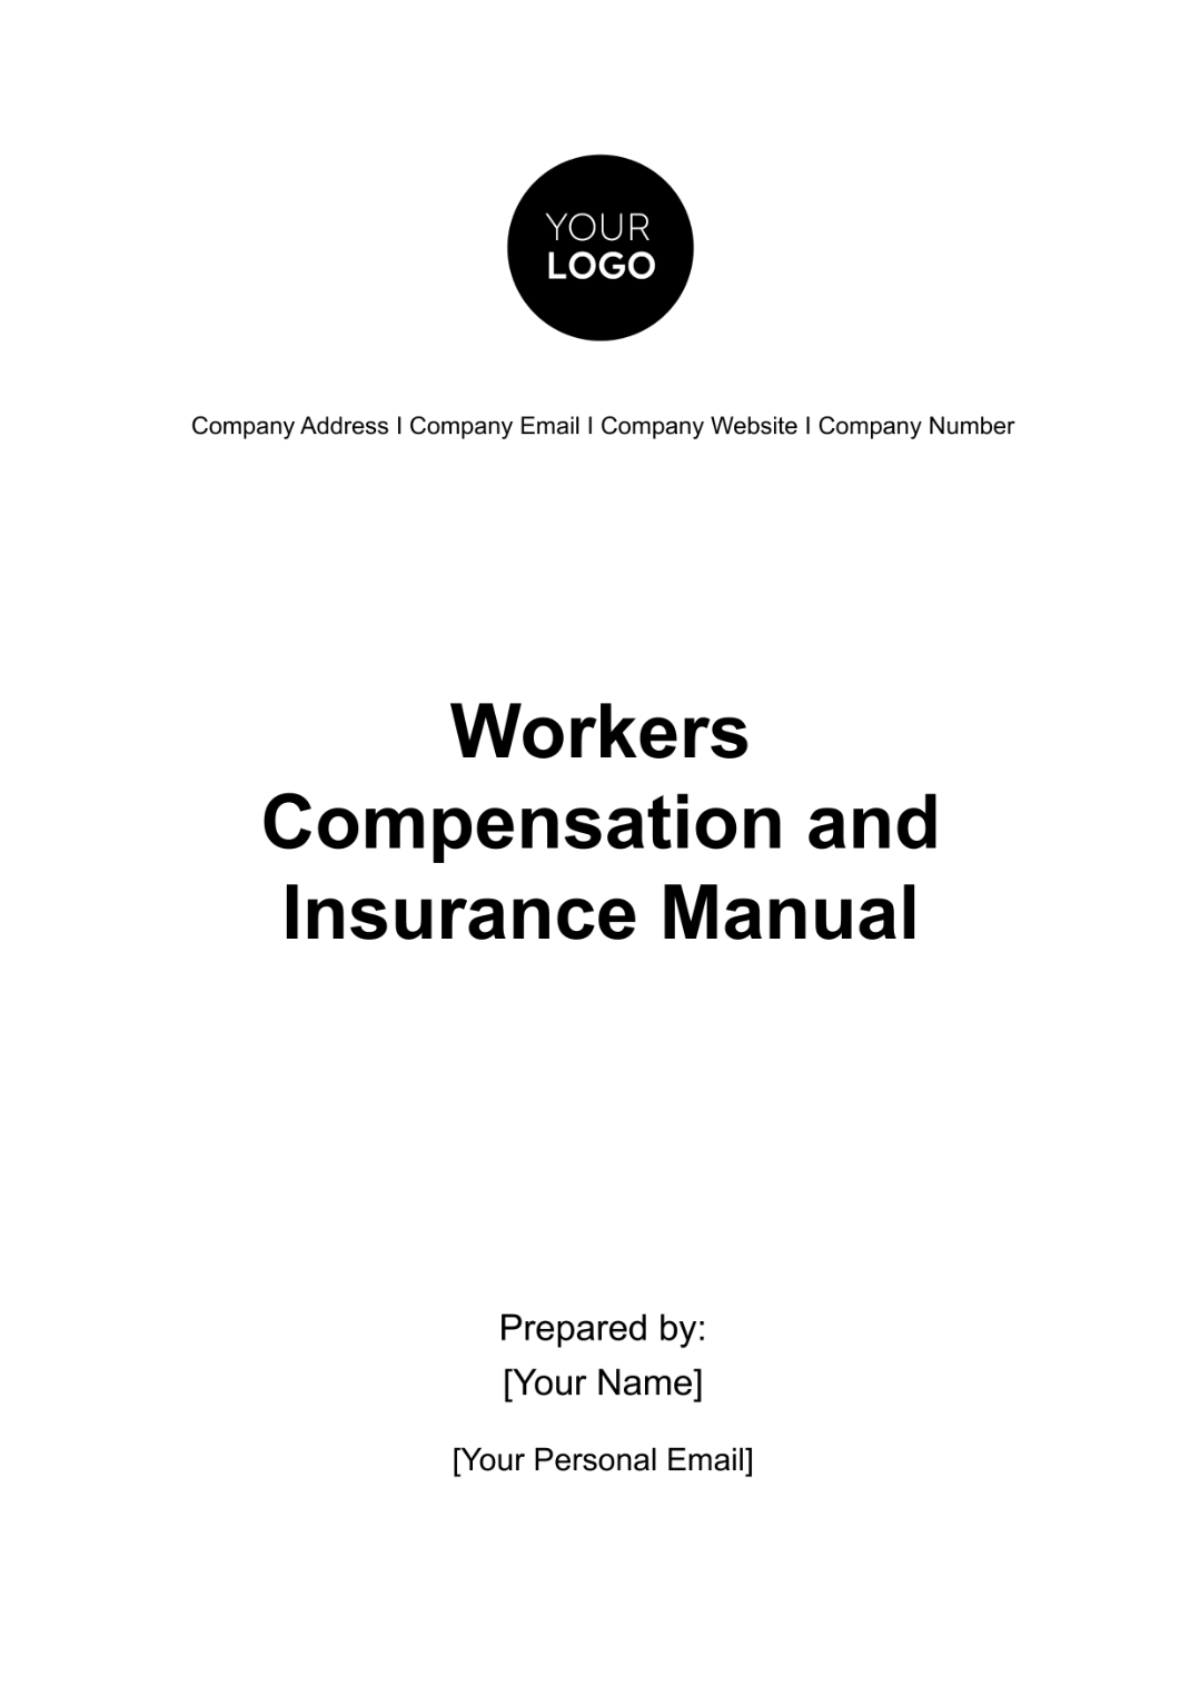 Free Workers Compensation and Insurance Manual HR Template